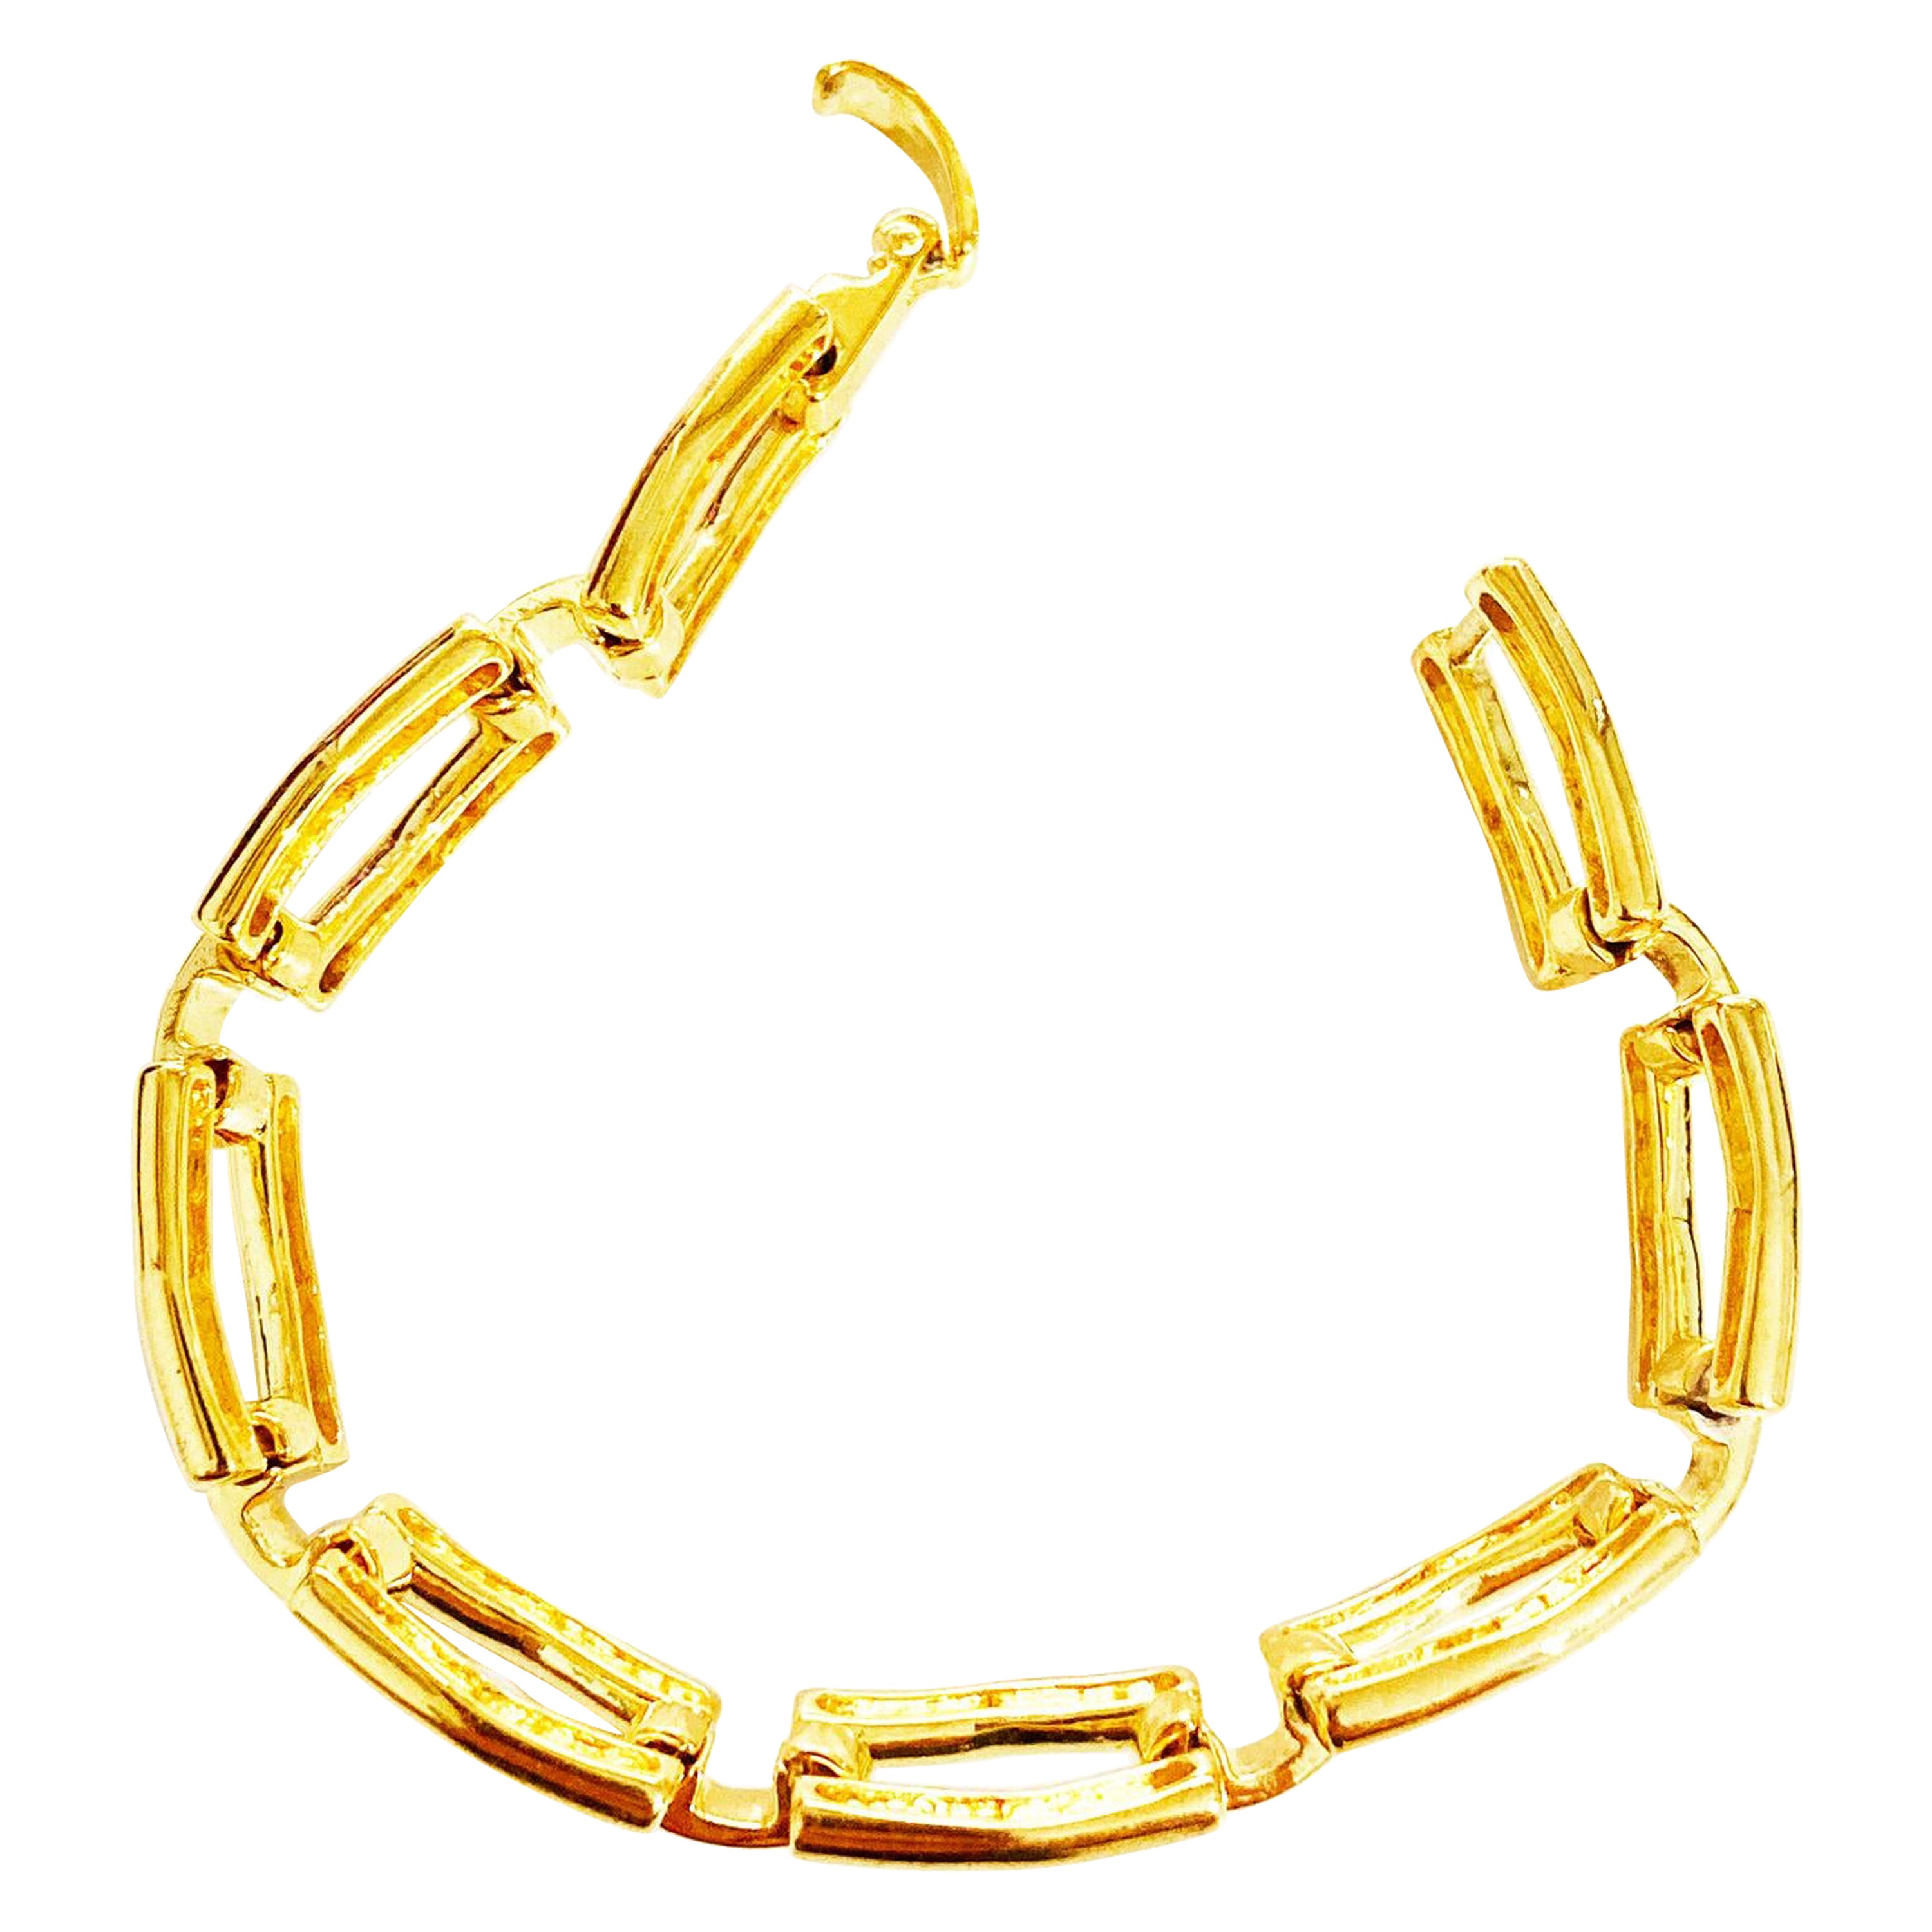 Rossella Ugolini 24K Yellow Gold Plated Unique Links Chain Bracelet For Sale